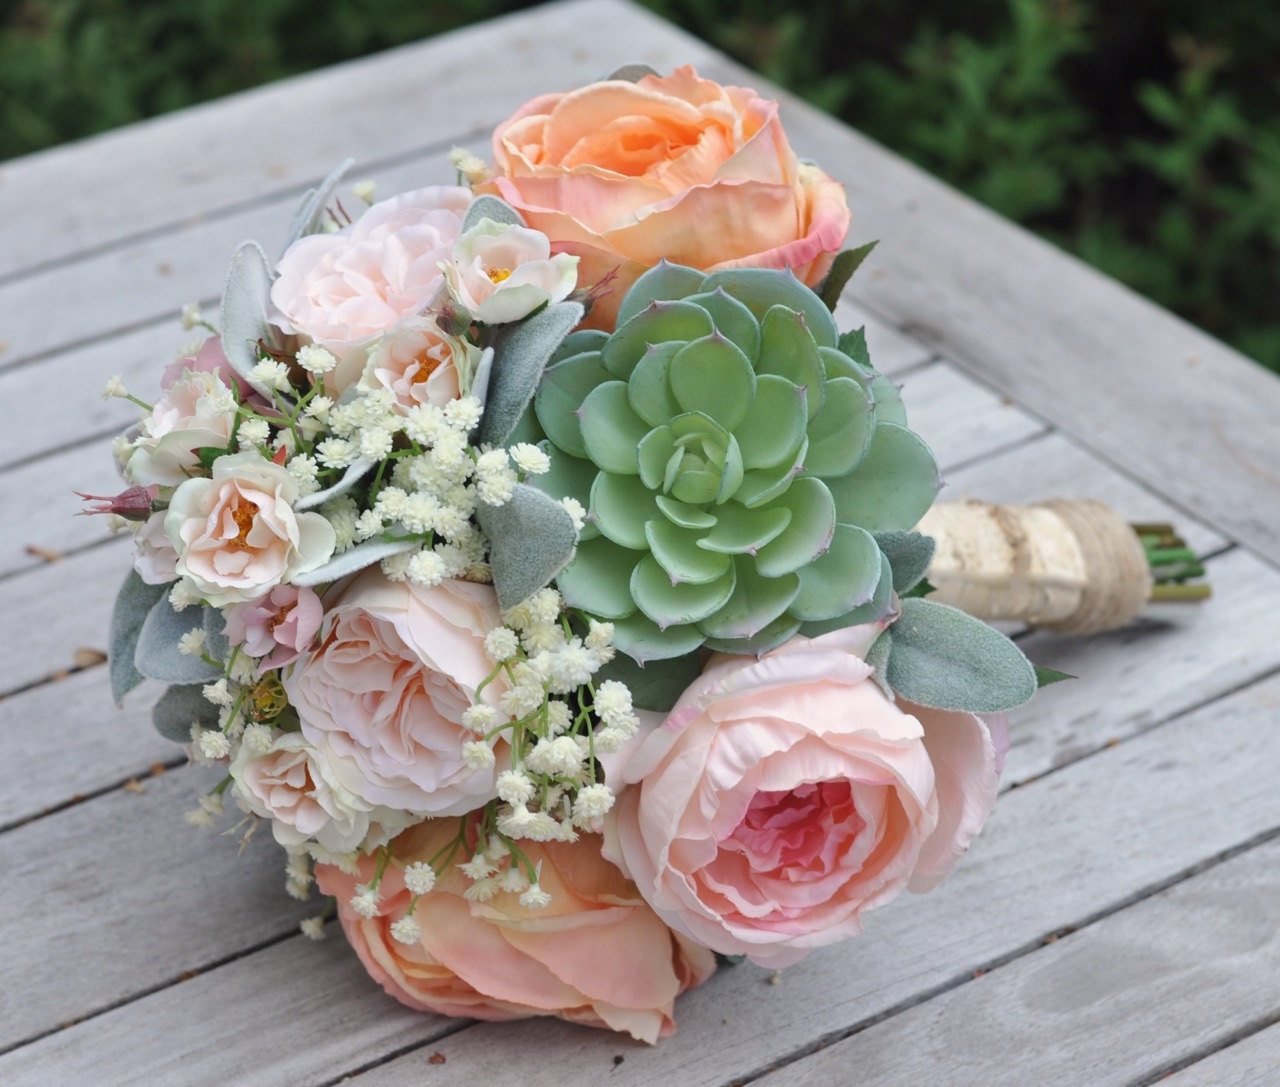 Peach and Pink Cabbage Roses, Succulents, Baby Breath silk flower bouquet.  — Holly's Wedding Flowers